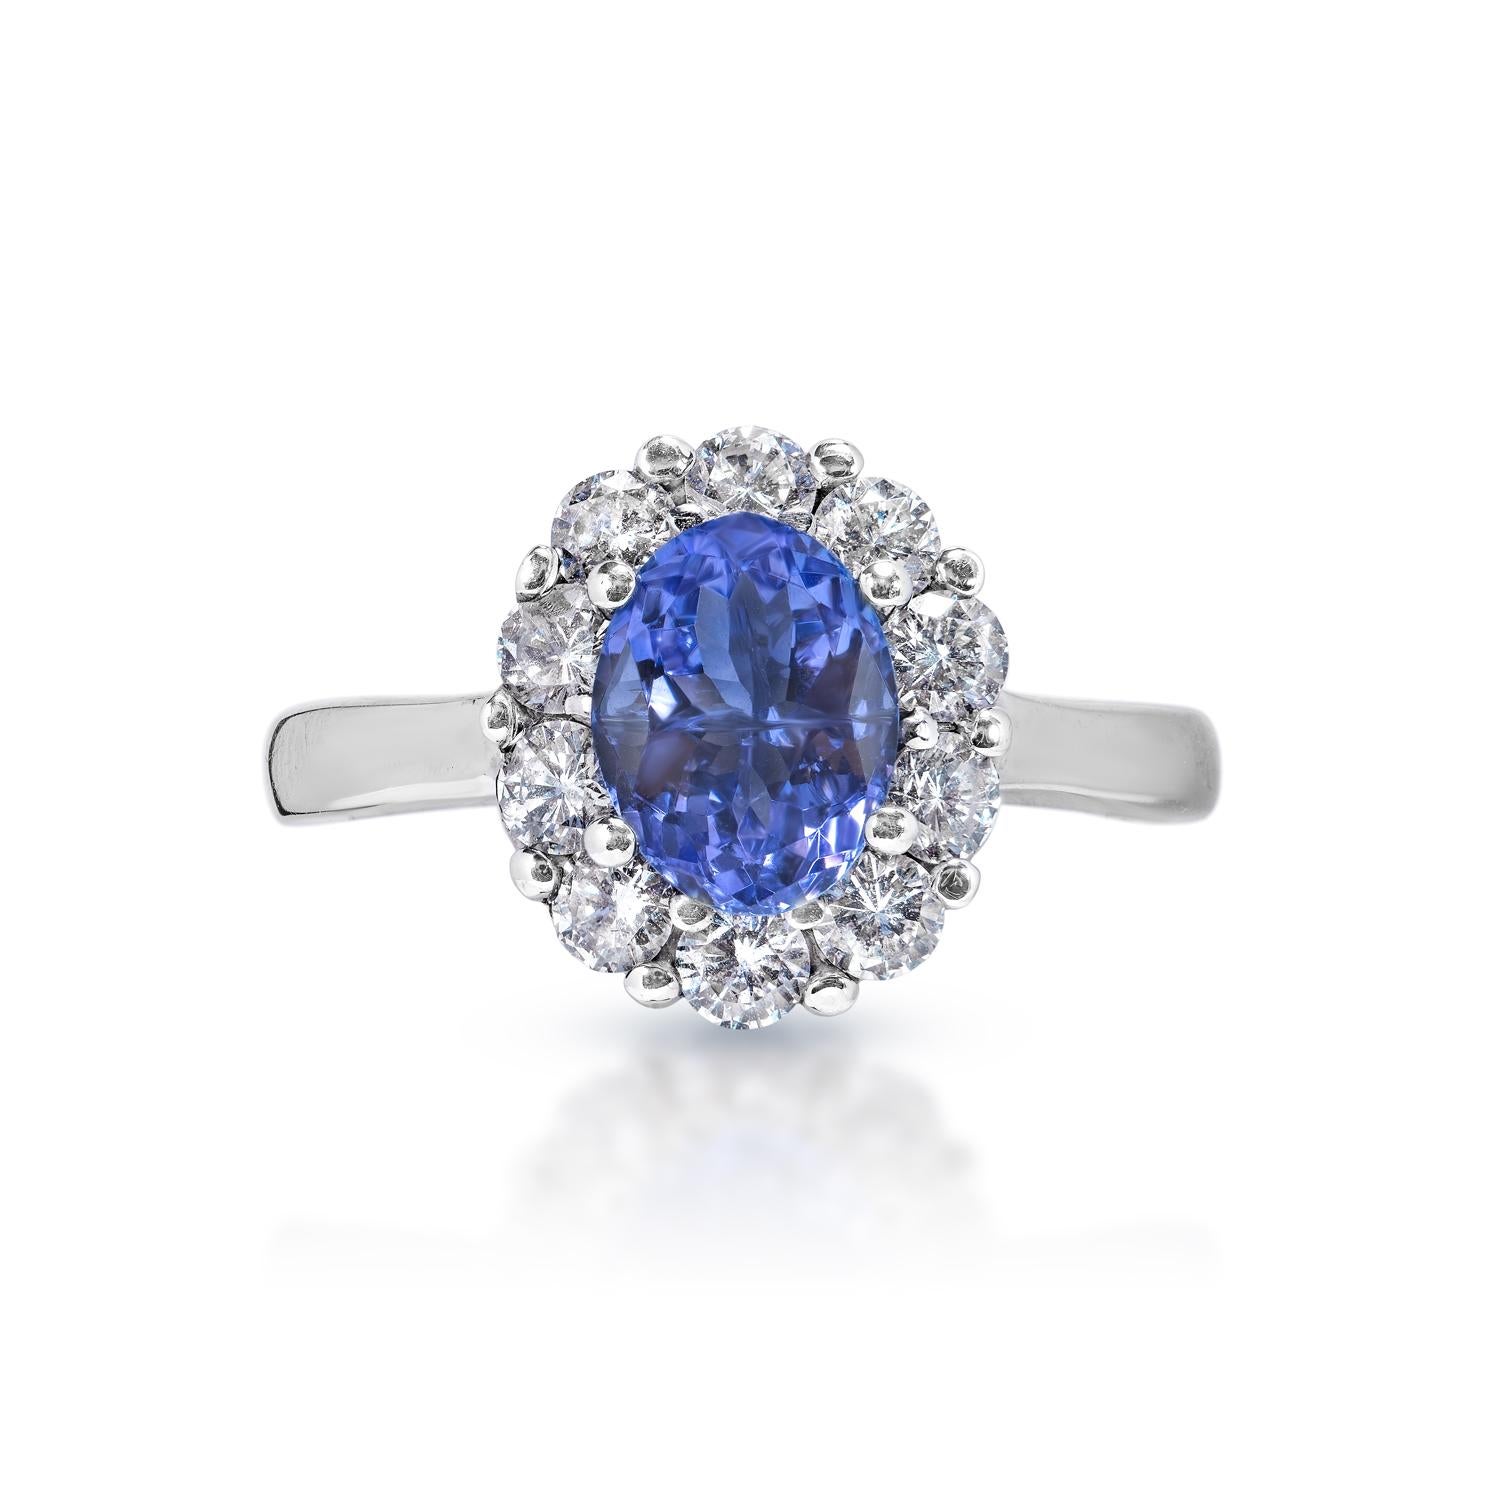 Earth Mined Center Tanzanite:
Carat Weight: 1.67 Carats
Color: Blue Tanzanite
Style: Oval Cut

Carat Weight: 0.82 Carats
Shape: Round Brilliant Cut
Setting: Halo
Metal: 14 Karat White Gold


Total Carat Weight: 2.49 Carats